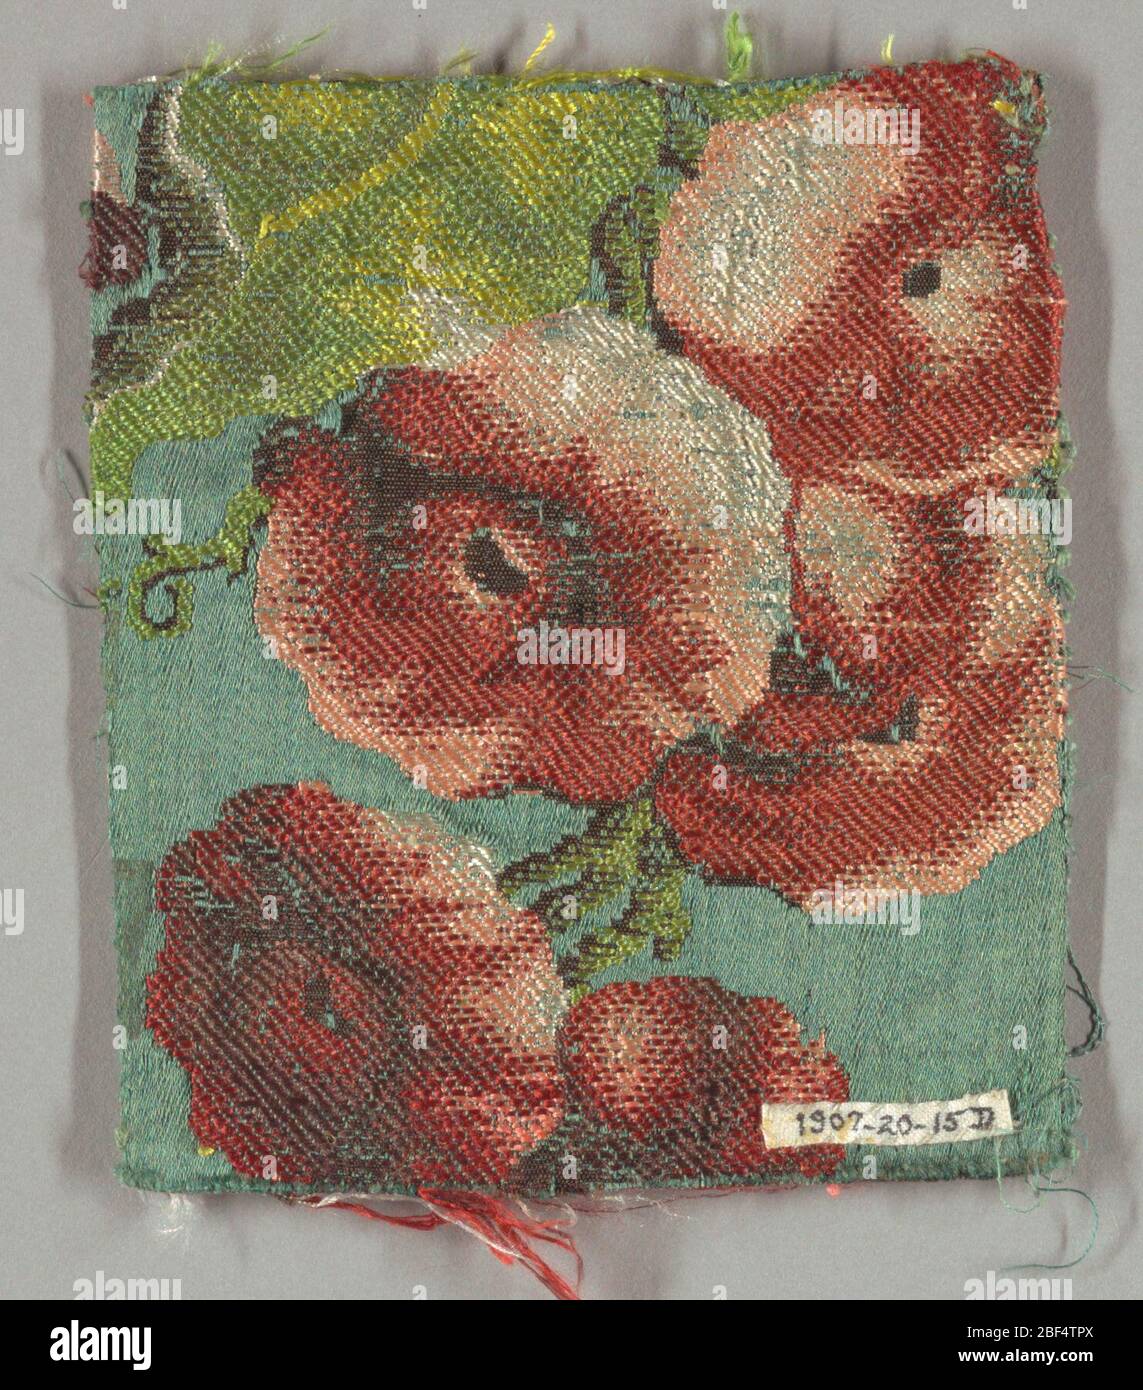 Fragments. Green satin ground with imcomplete design of large-scale flowers and smaller scale tree. Design partly in white and brown secondary wefts and partly in polychrome brocading threads. c: has left selvage present. Stock Photo